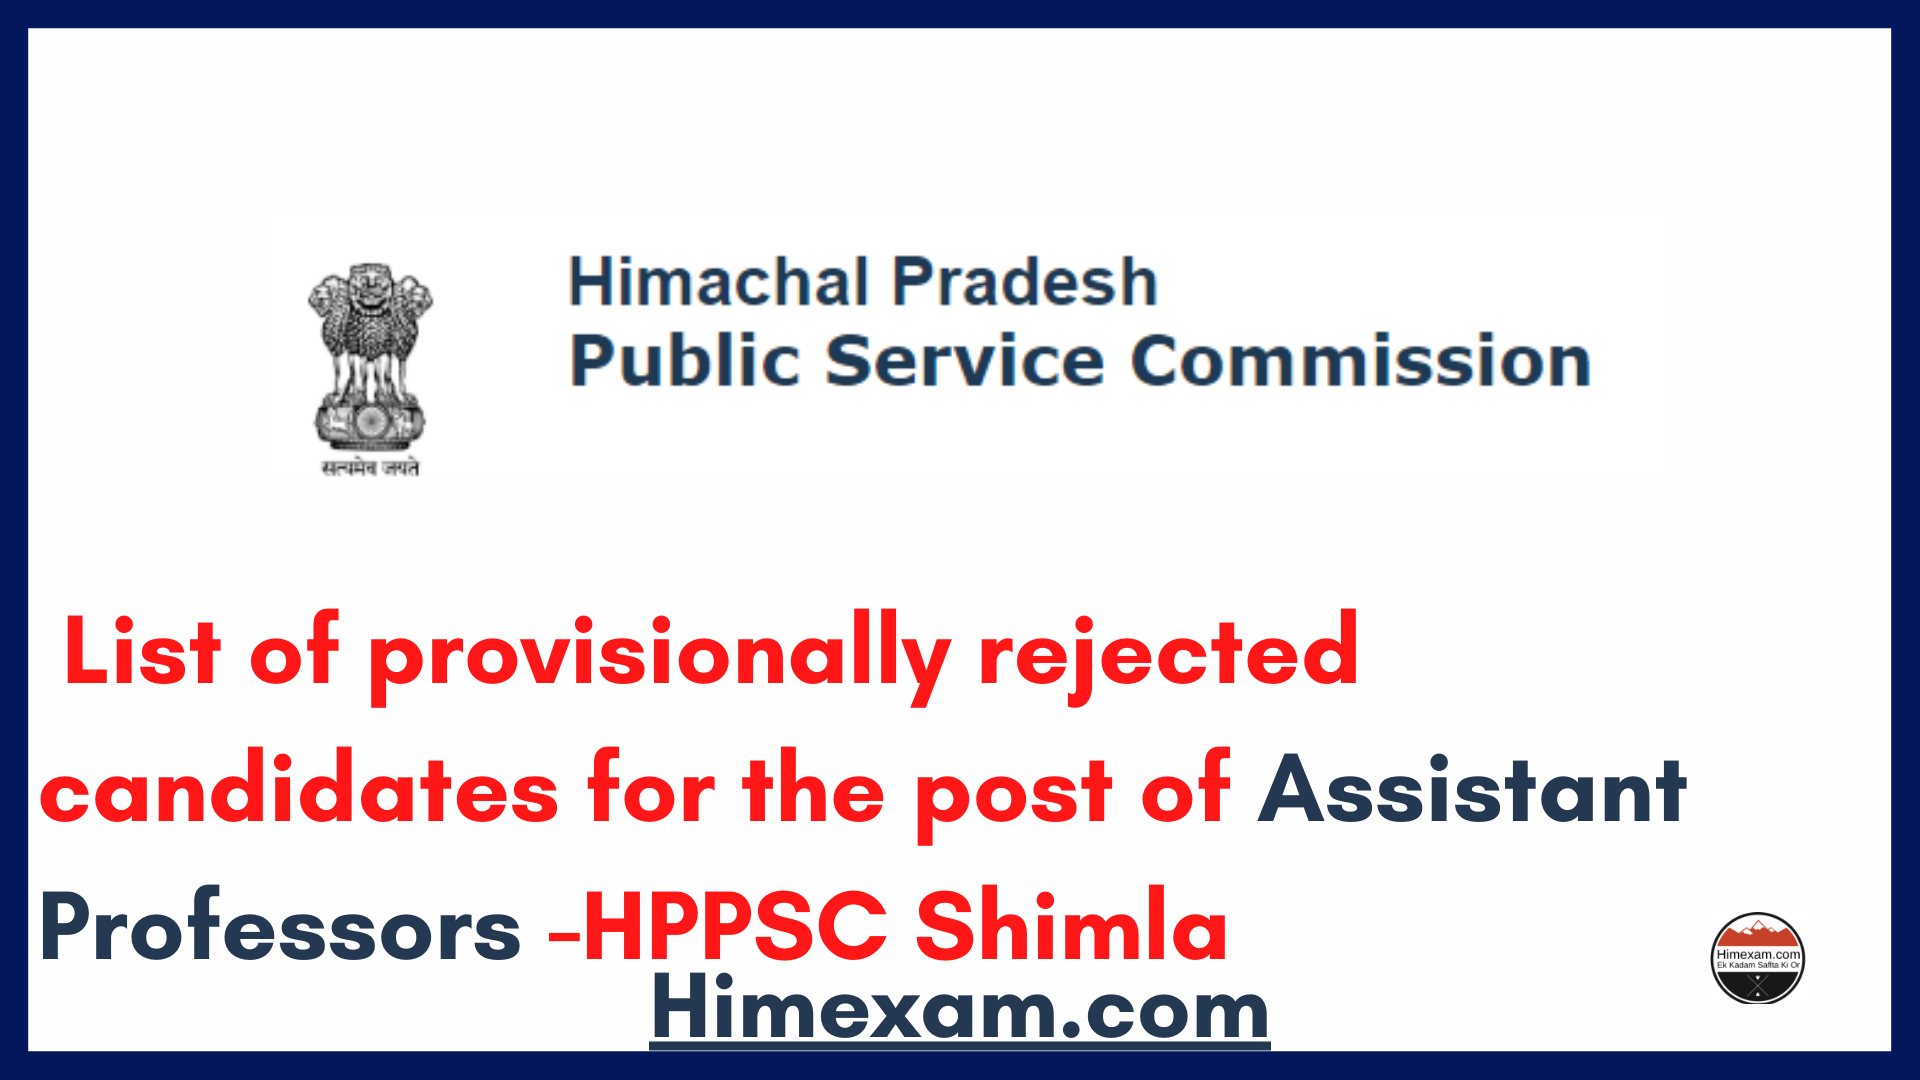 List of provisionally rejected candidates for the post of Assistant Professors -HPPSC Shimla